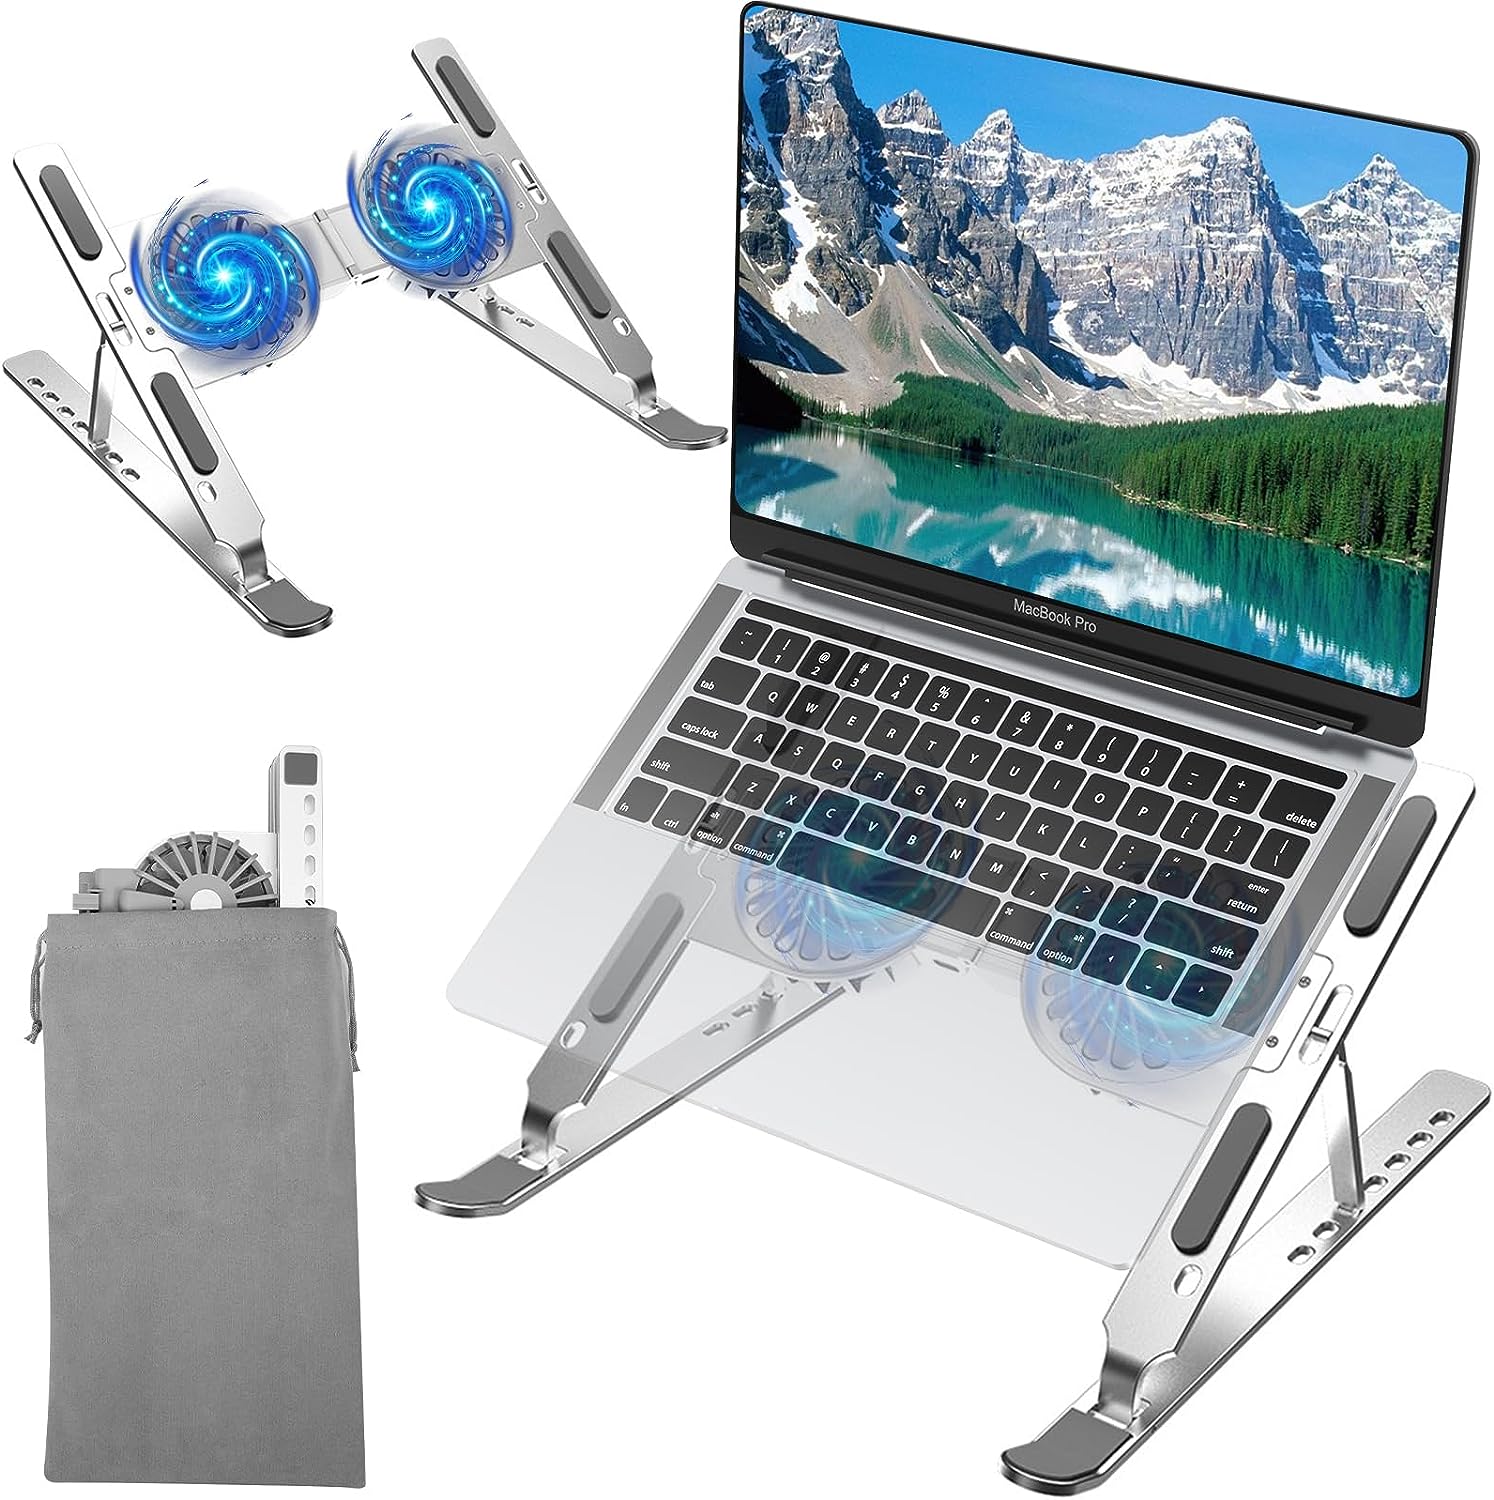 AVAKOT Laptop Stand with Fan | Laptop Stand for Desk [...]